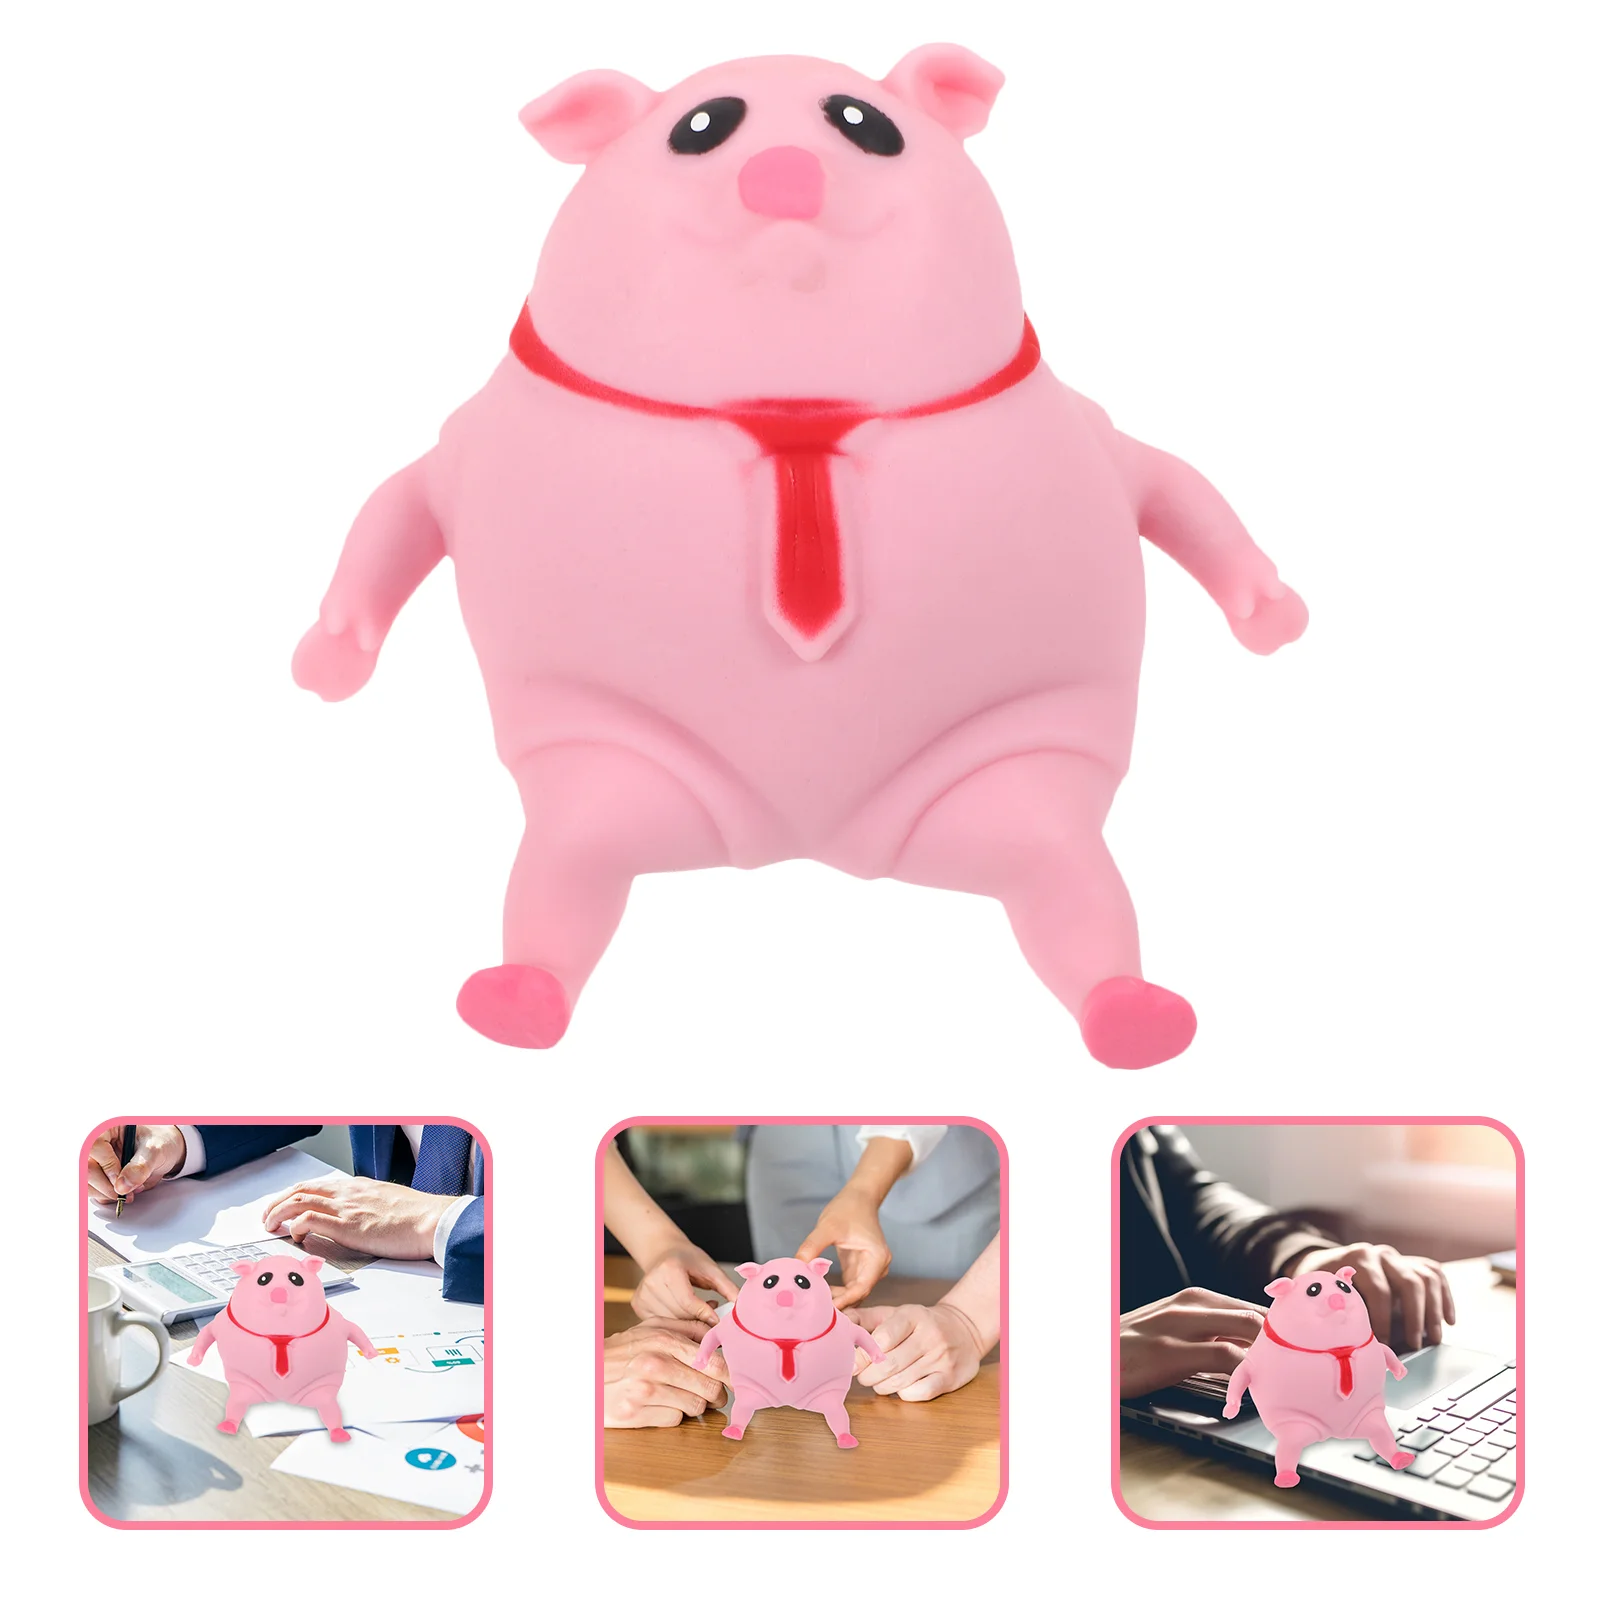 

Toy Toys Stress Kids Squishy Office Desk Decompression Piggy Animal Stretch Squeeze Pink Squeezing Balls Simulation Sensory Ball